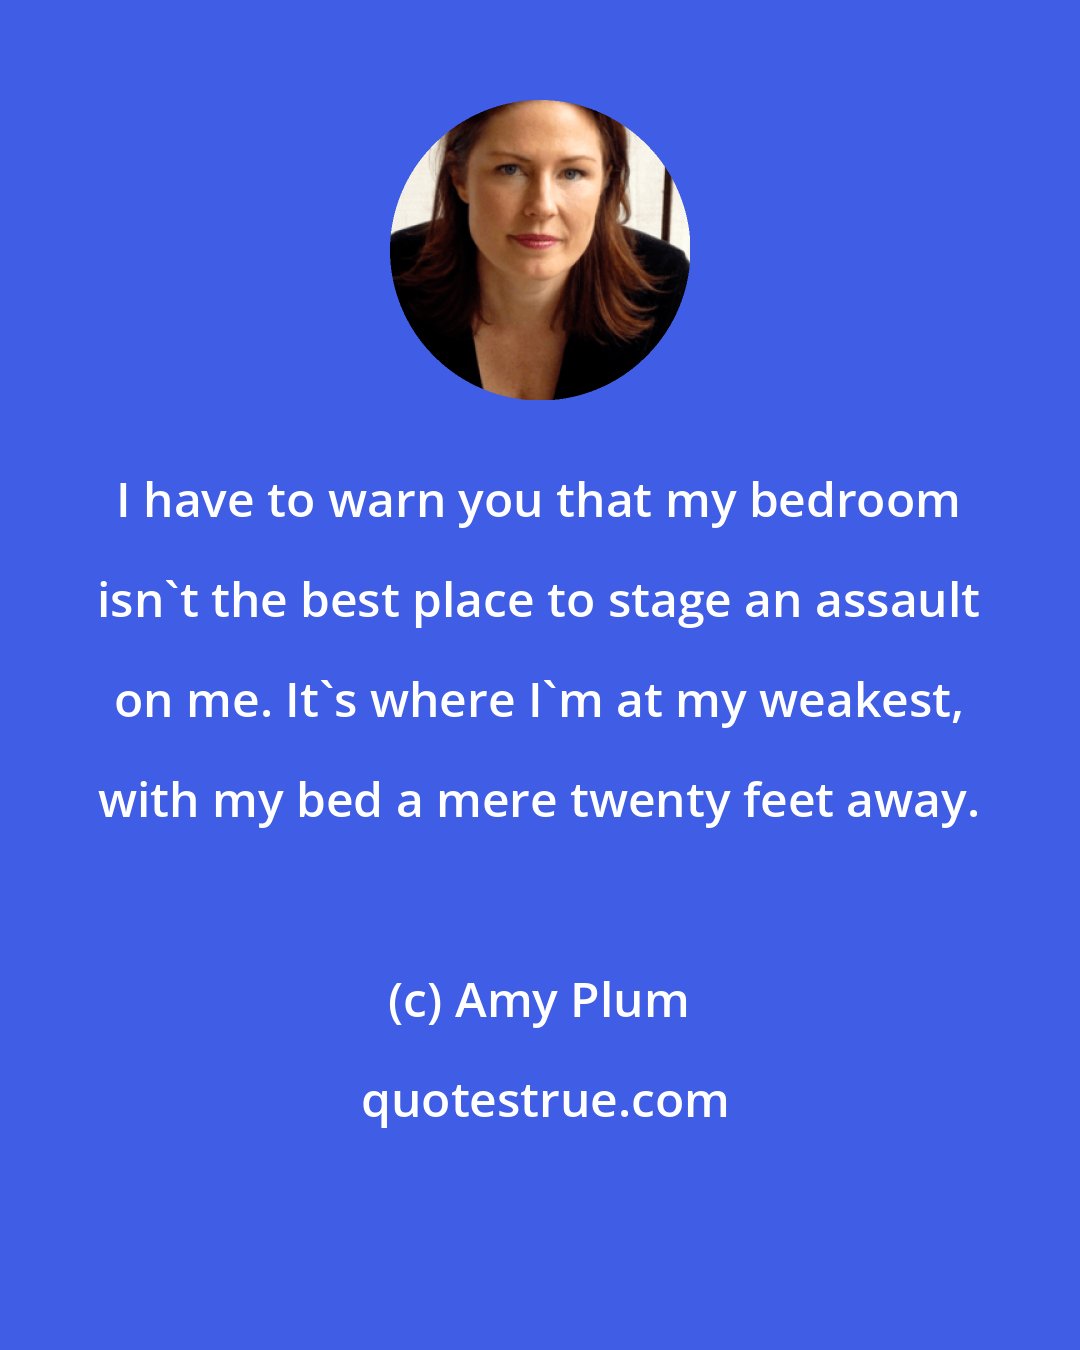 Amy Plum: I have to warn you that my bedroom isn't the best place to stage an assault on me. It's where I'm at my weakest, with my bed a mere twenty feet away.